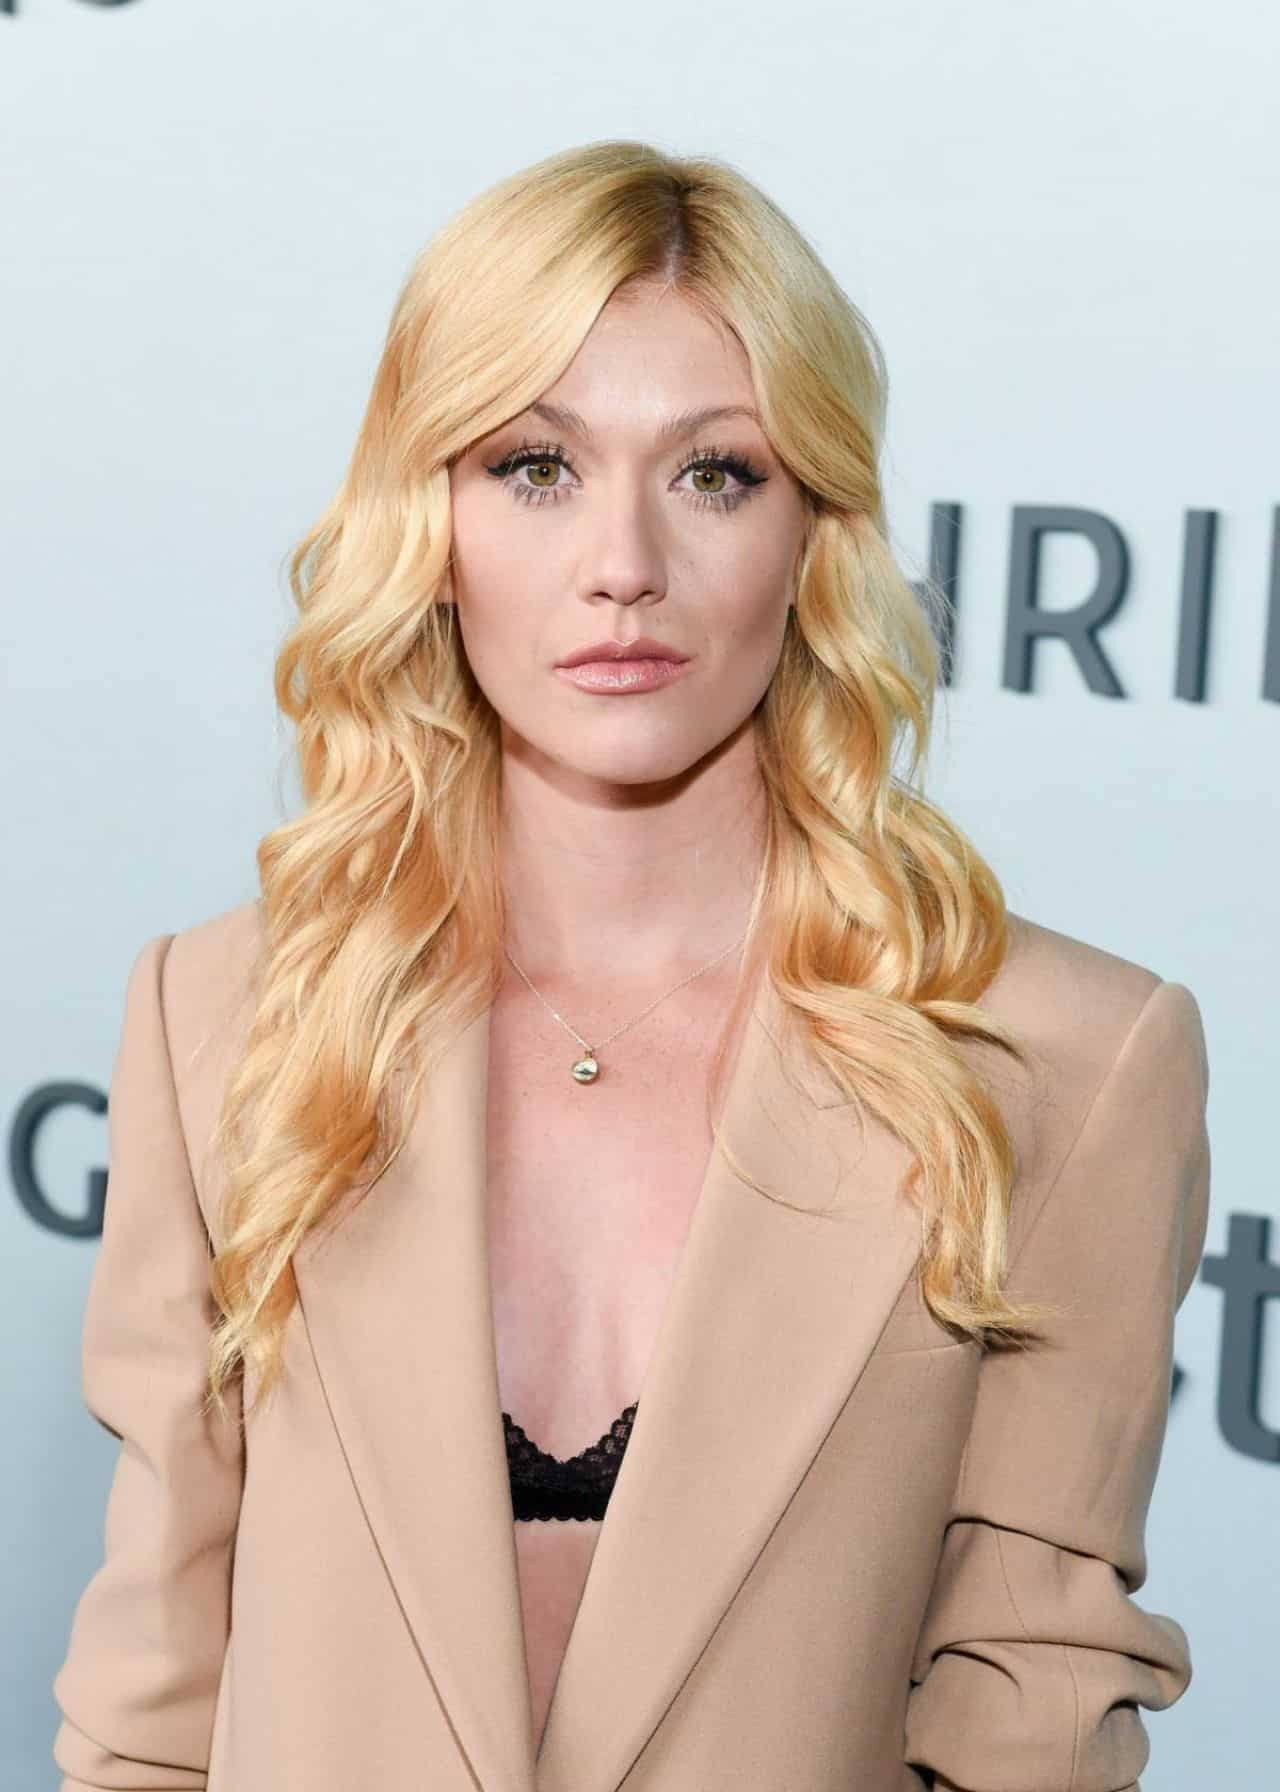 Katherine McNamara is Effortlessly Chic at the Premiere of Shrinking